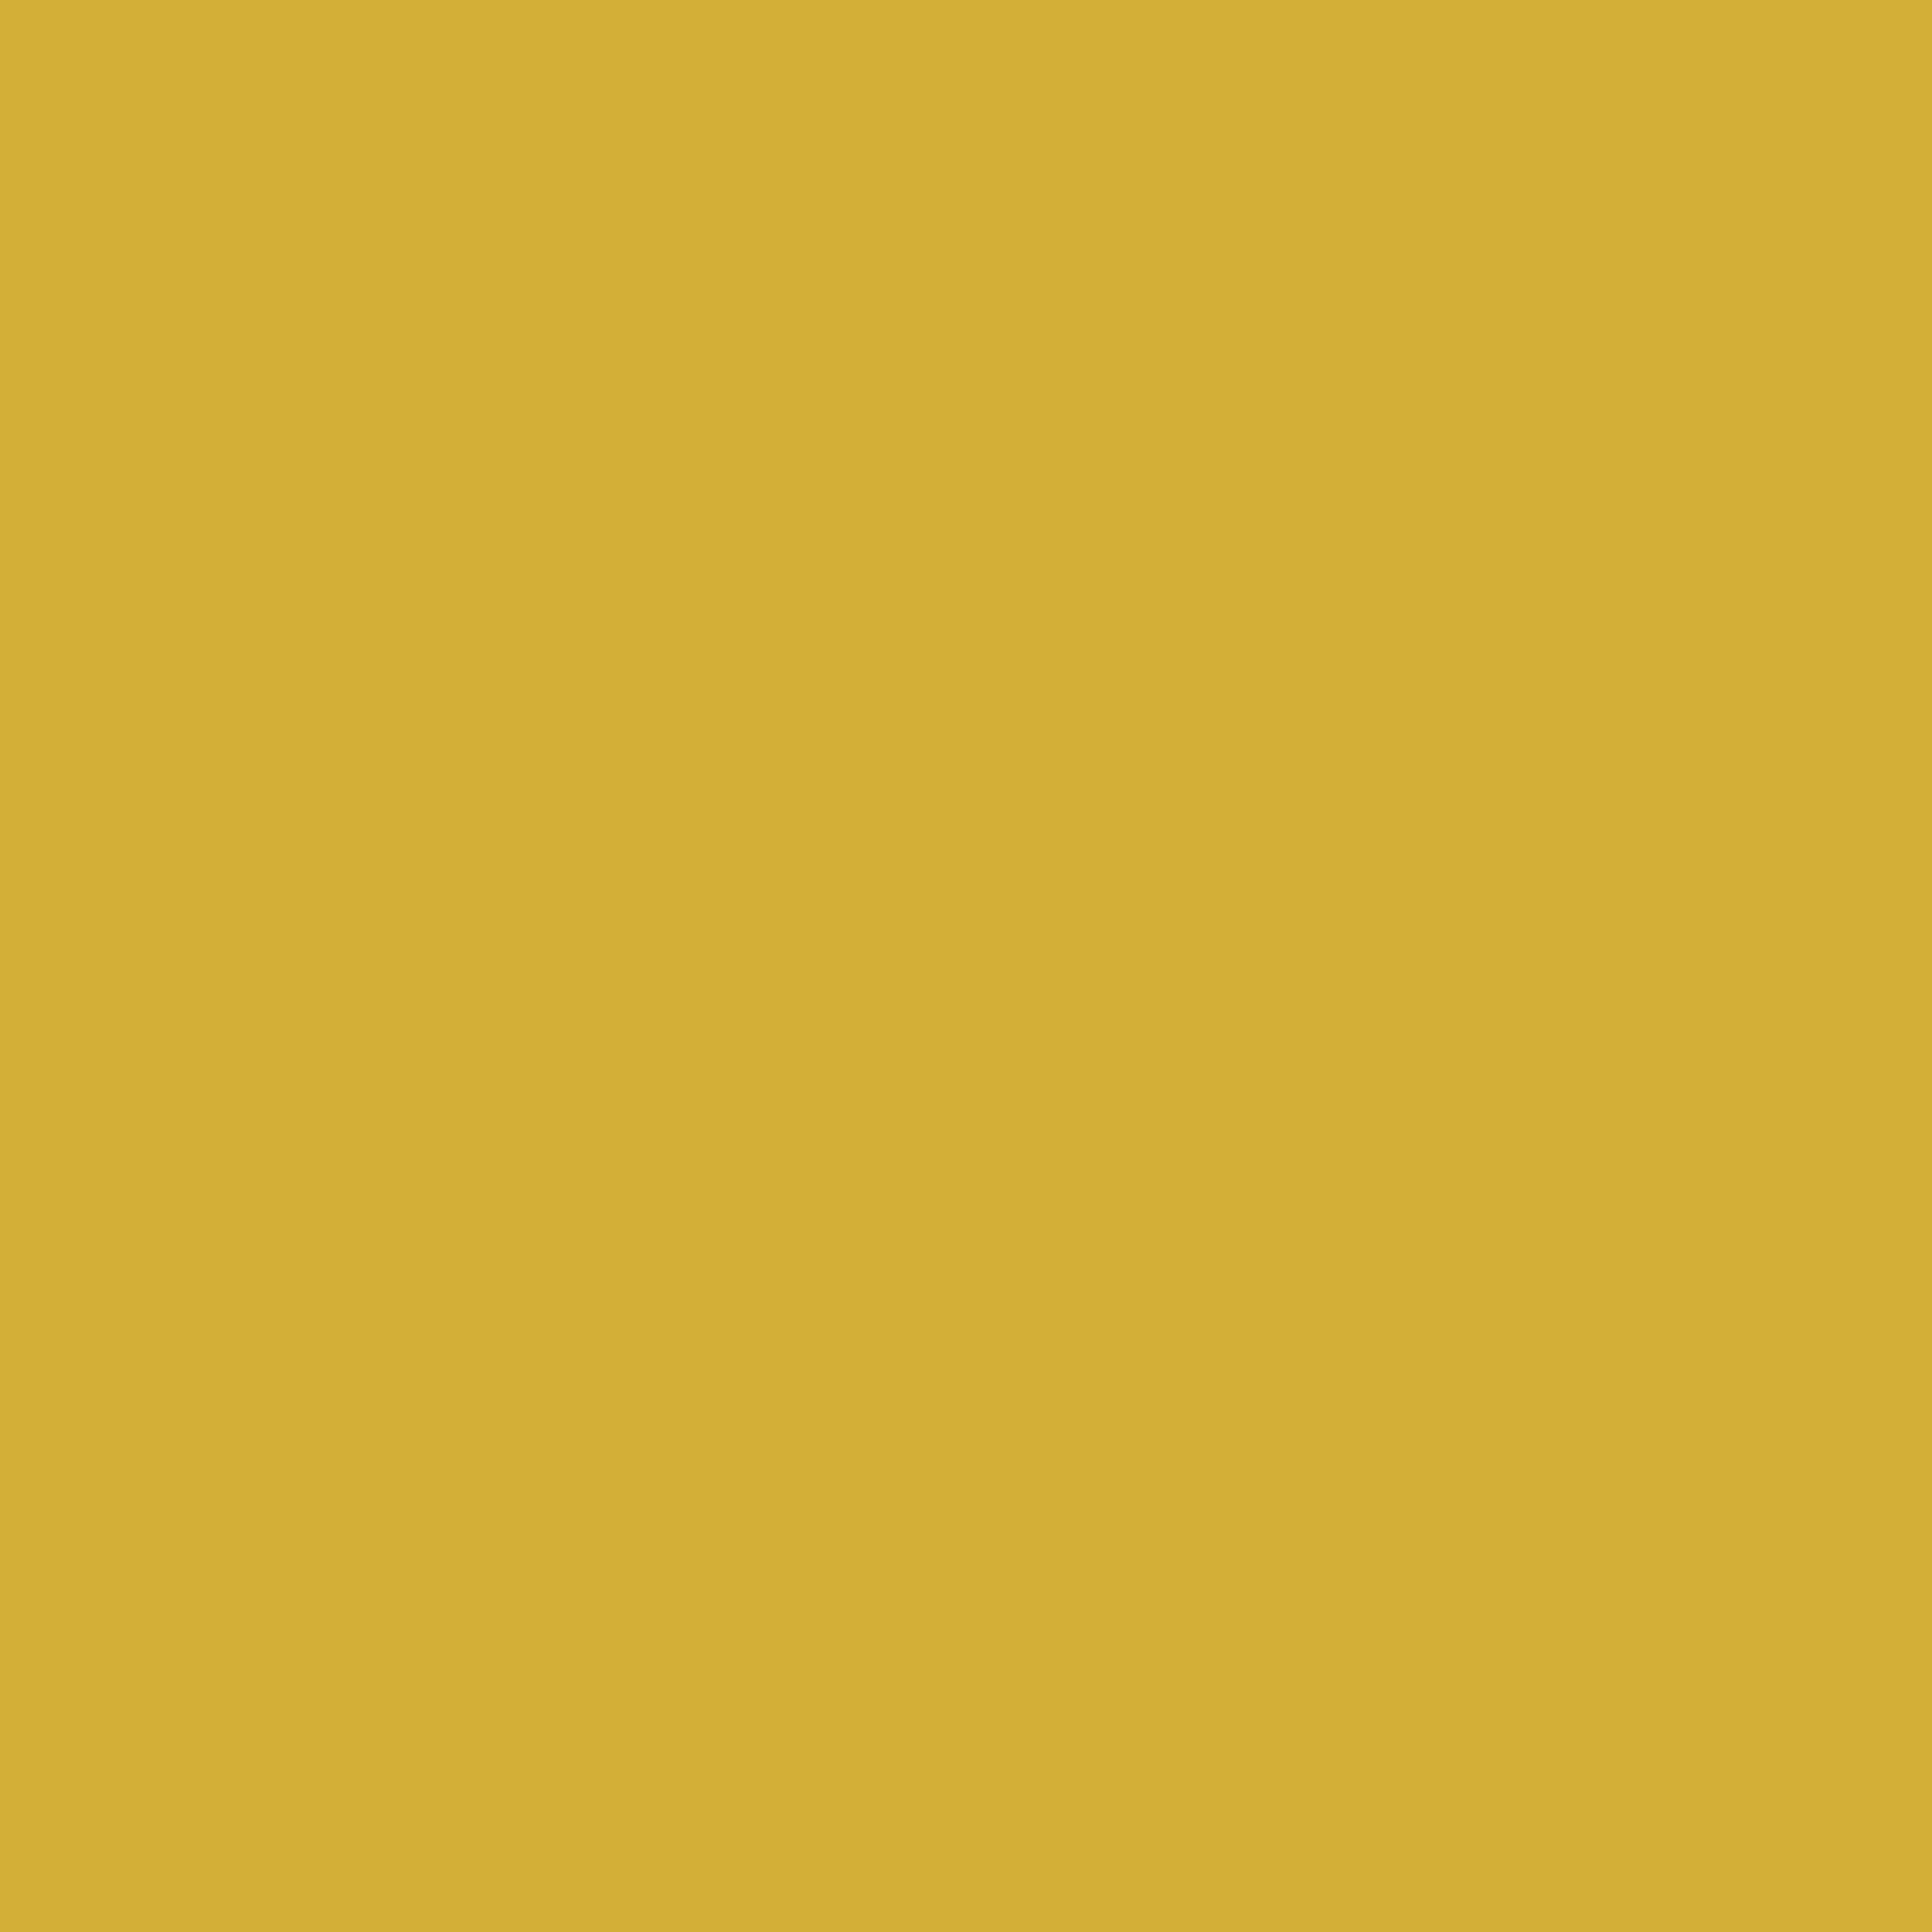 2732x2732 Gold Metallic Solid Color Background